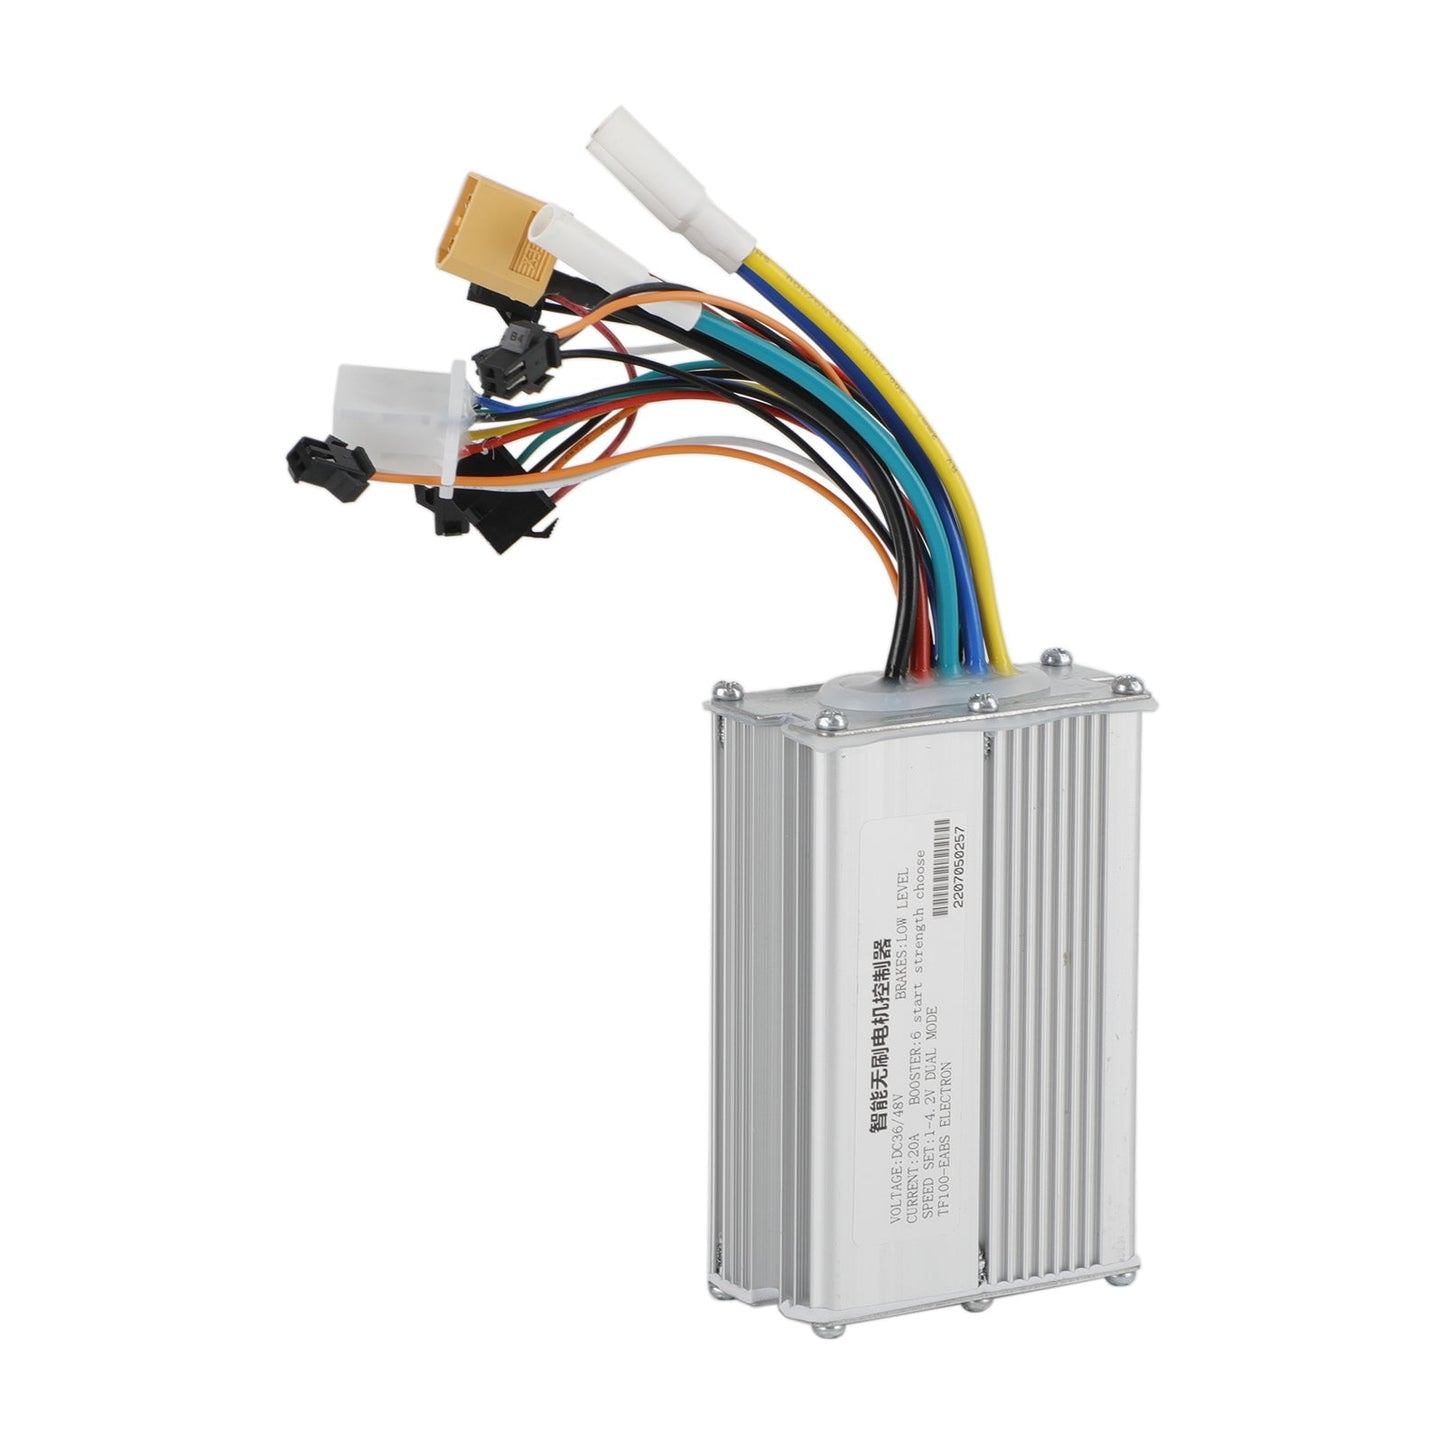 48 V 20A Electric Scooter Motor Controller für 10 "Kugoo M4